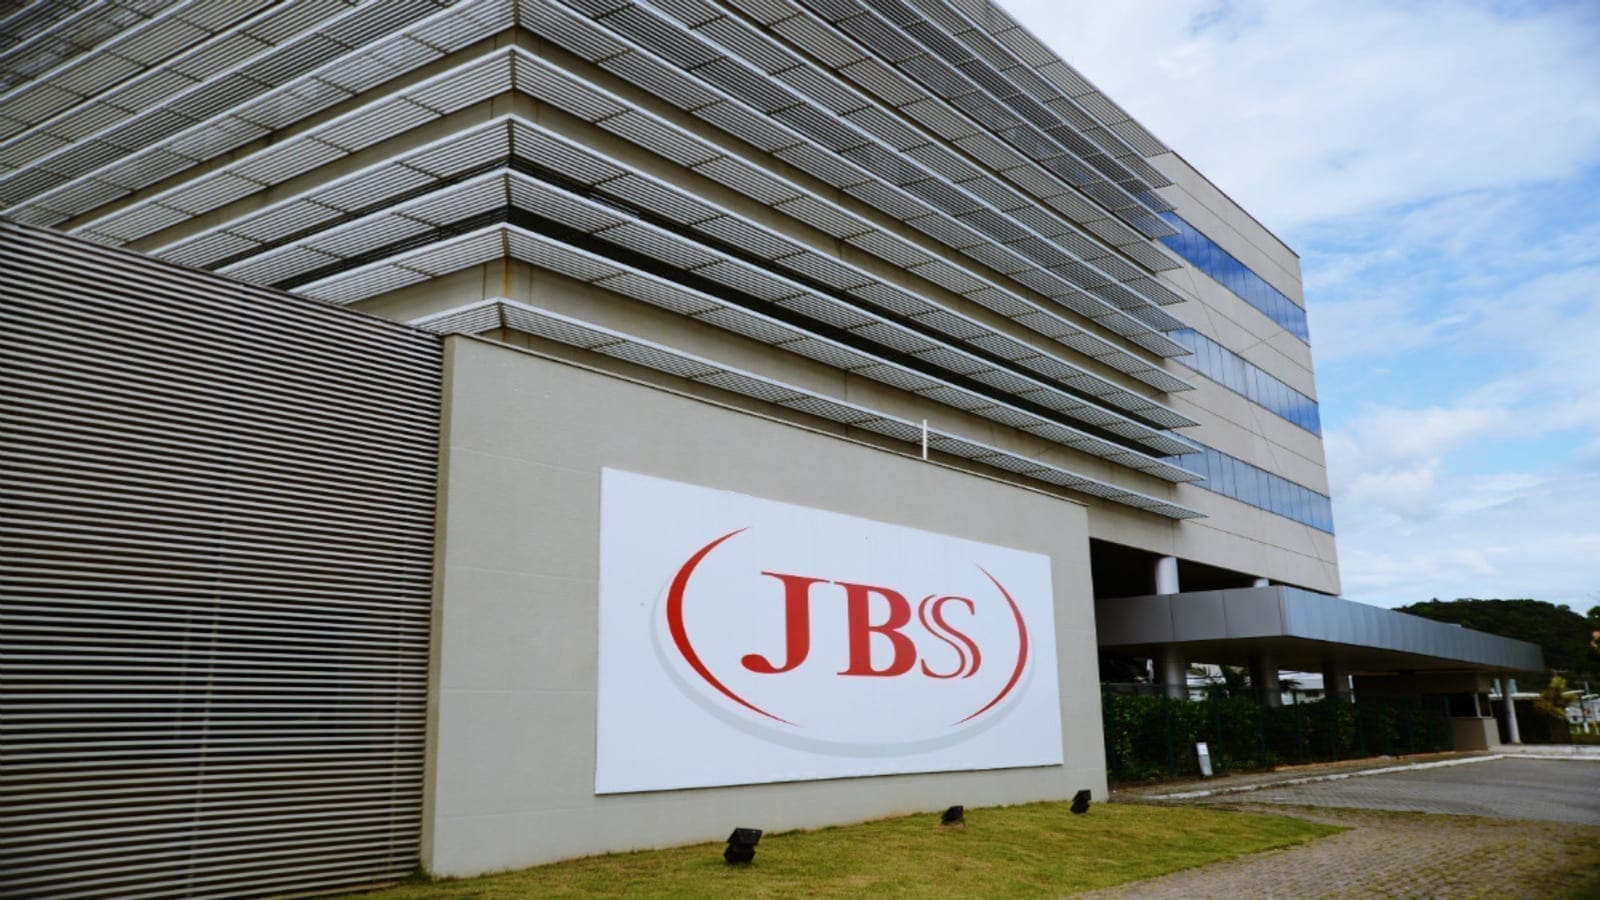 JBS to invest US$351m in expanding Brazilian poultry production capacity to meet market demand